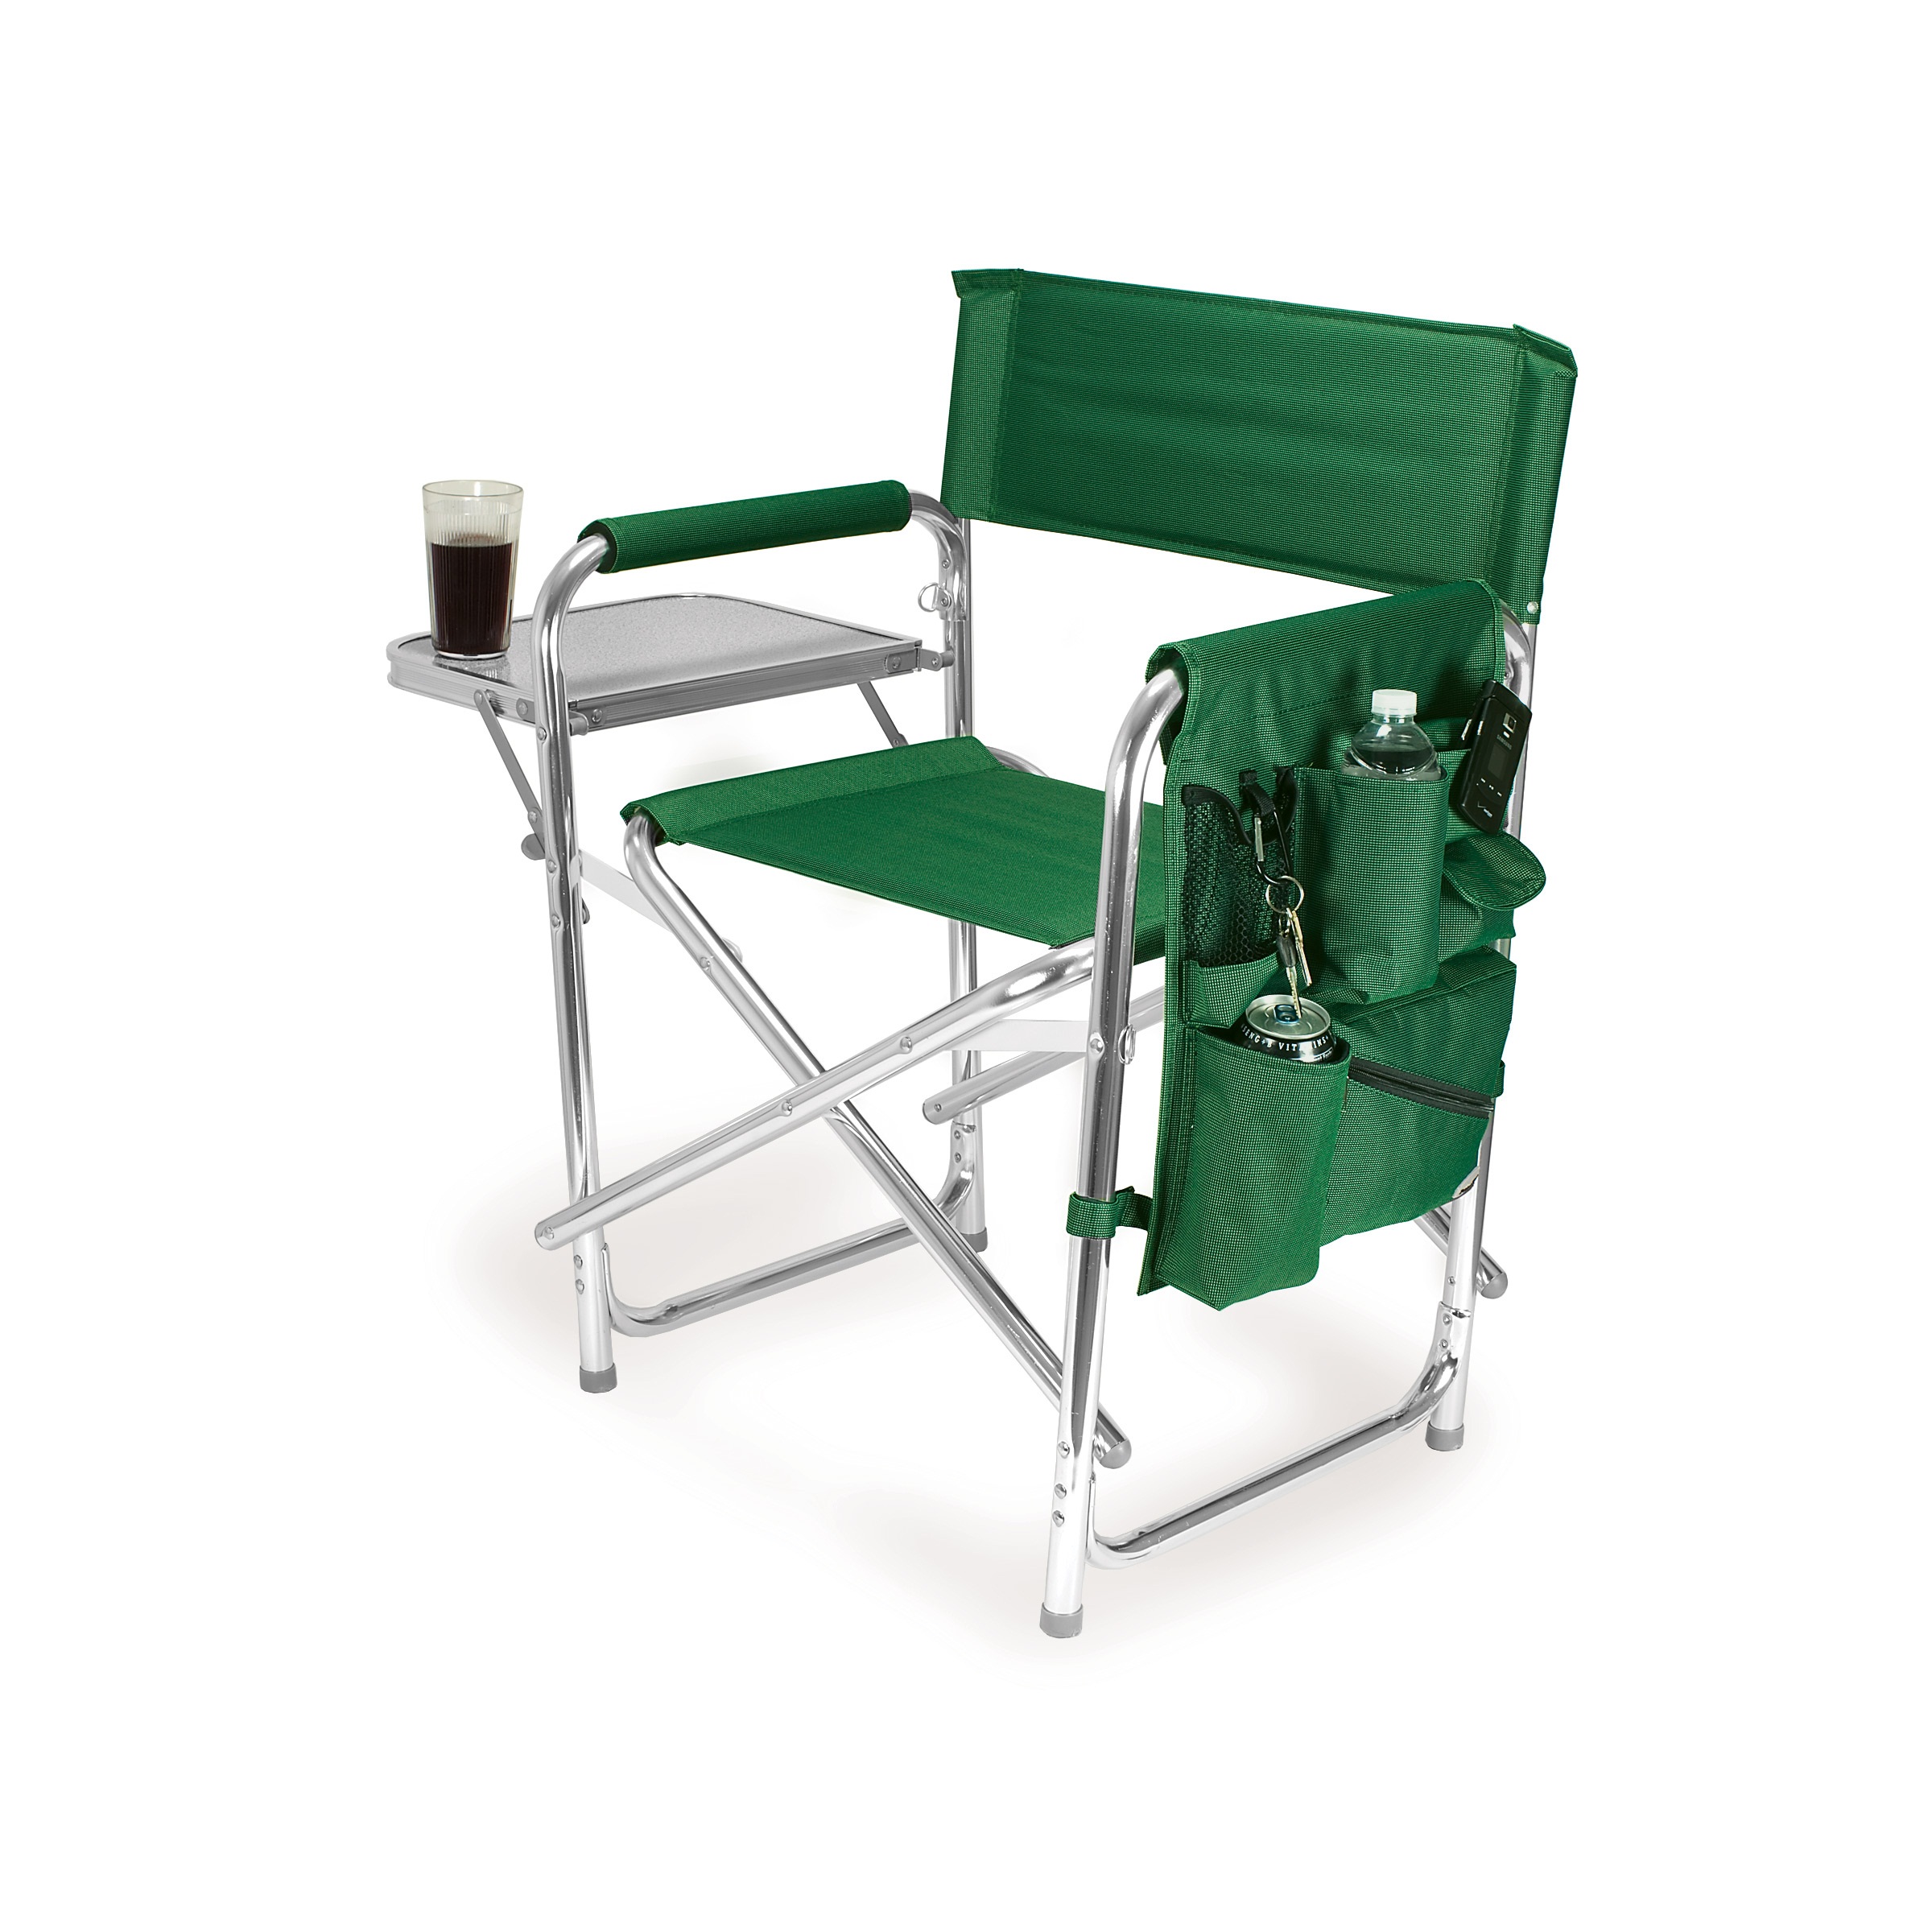 folding camping chairs picnic time green portable folding sports/camping chair DSDAYUH